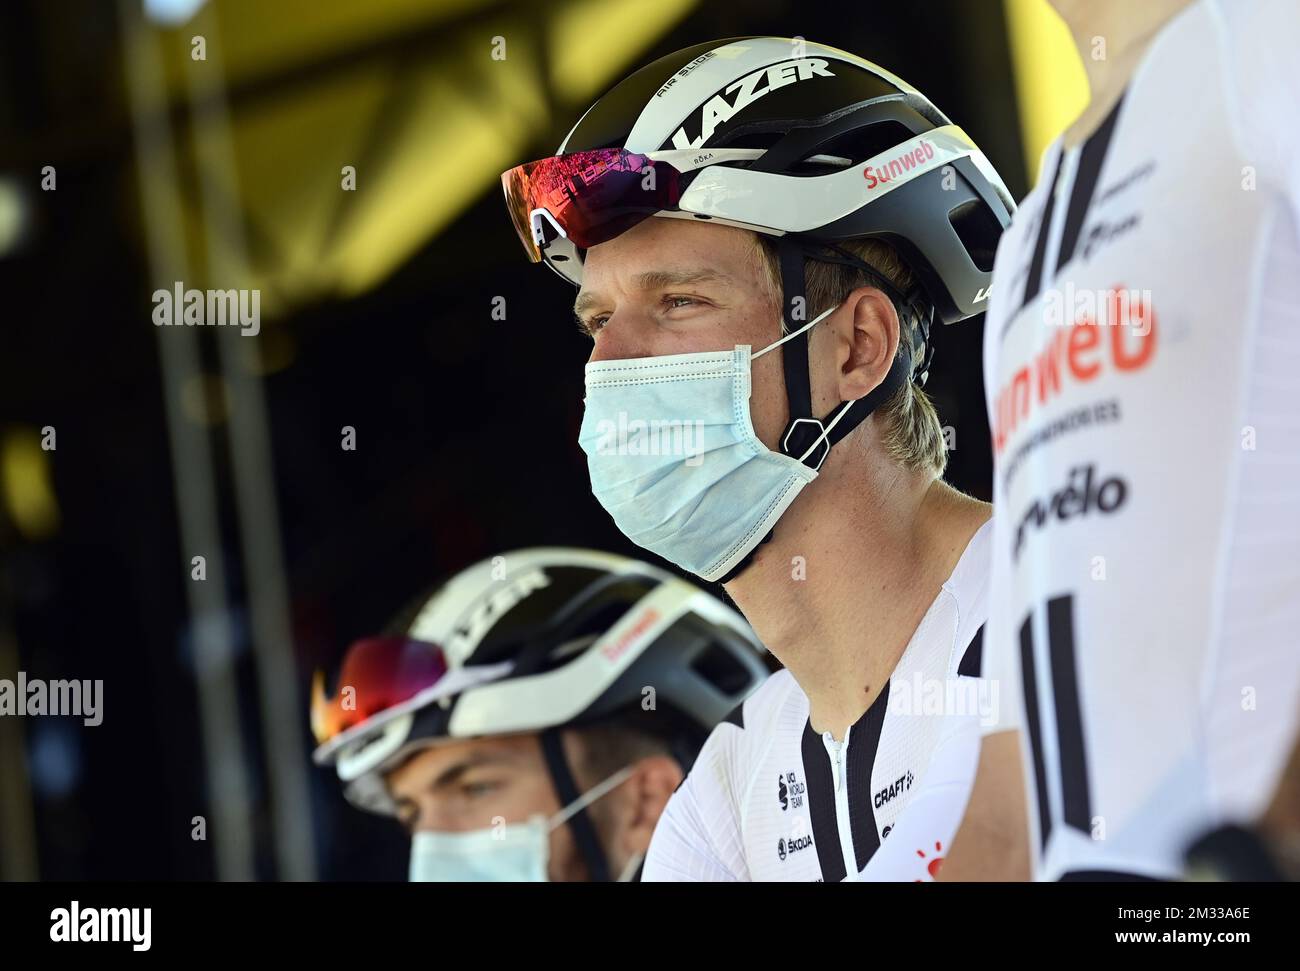 Cees Bol of Team Sunweb pictured at the start of the ninth stage of the 107th edition of the Tour de France cycling race from Ile d'Oleron Le Chateau-d'Oleron to Ile de Re Saint-Martin-de-Re (168,5km), in France, Tuesday 08 September 2020. This year's Tour de France was postponed due to the worldwide Covid-19 pandemic. The 2020 race starts in Nice on Saturday 29 August and ends on 20 September. BELGA PHOTO POOL PETER DE VOECHT Stock Photo